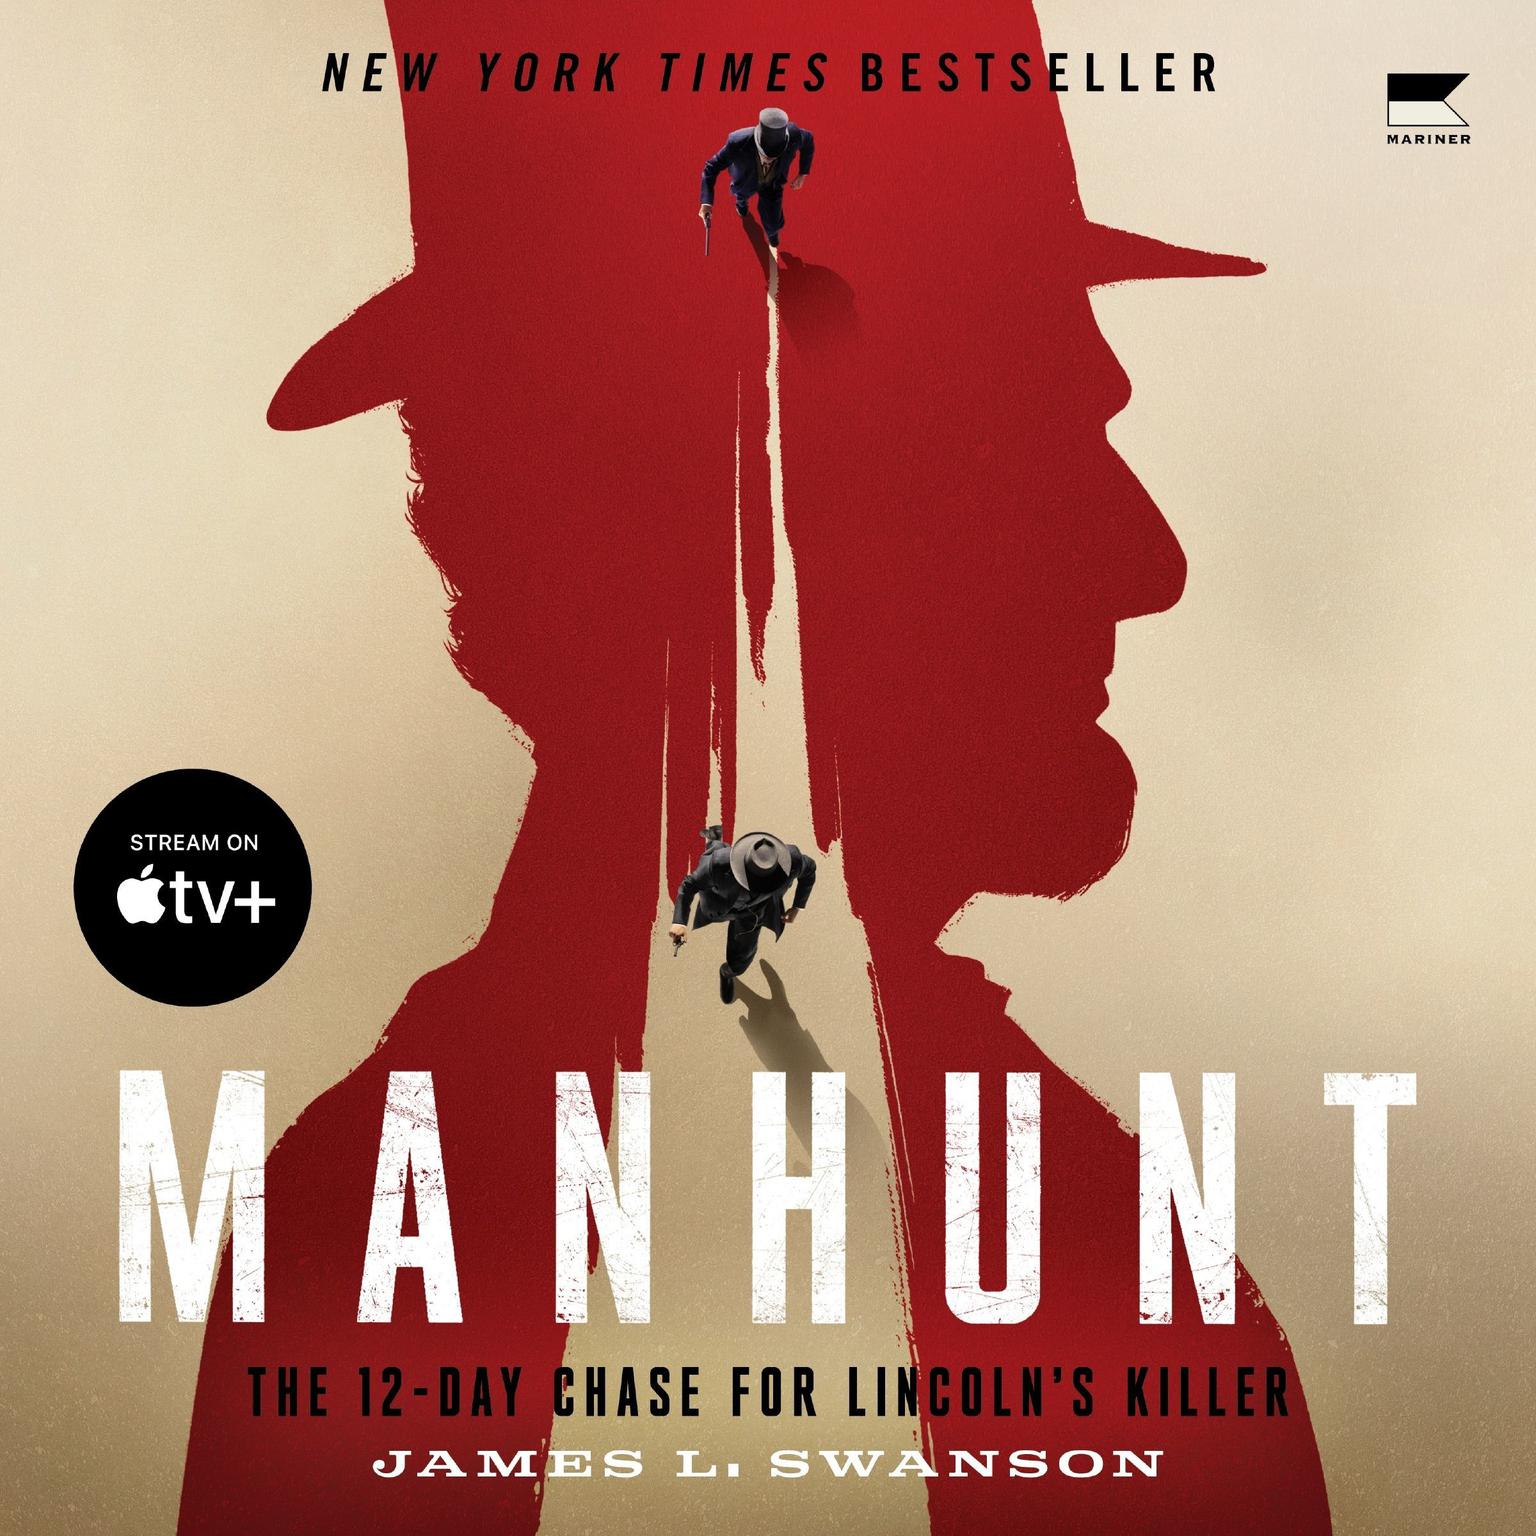 Manhunt (Abridged): The 12-Day Chase for Lincolns Killer Audiobook, by James L. Swanson